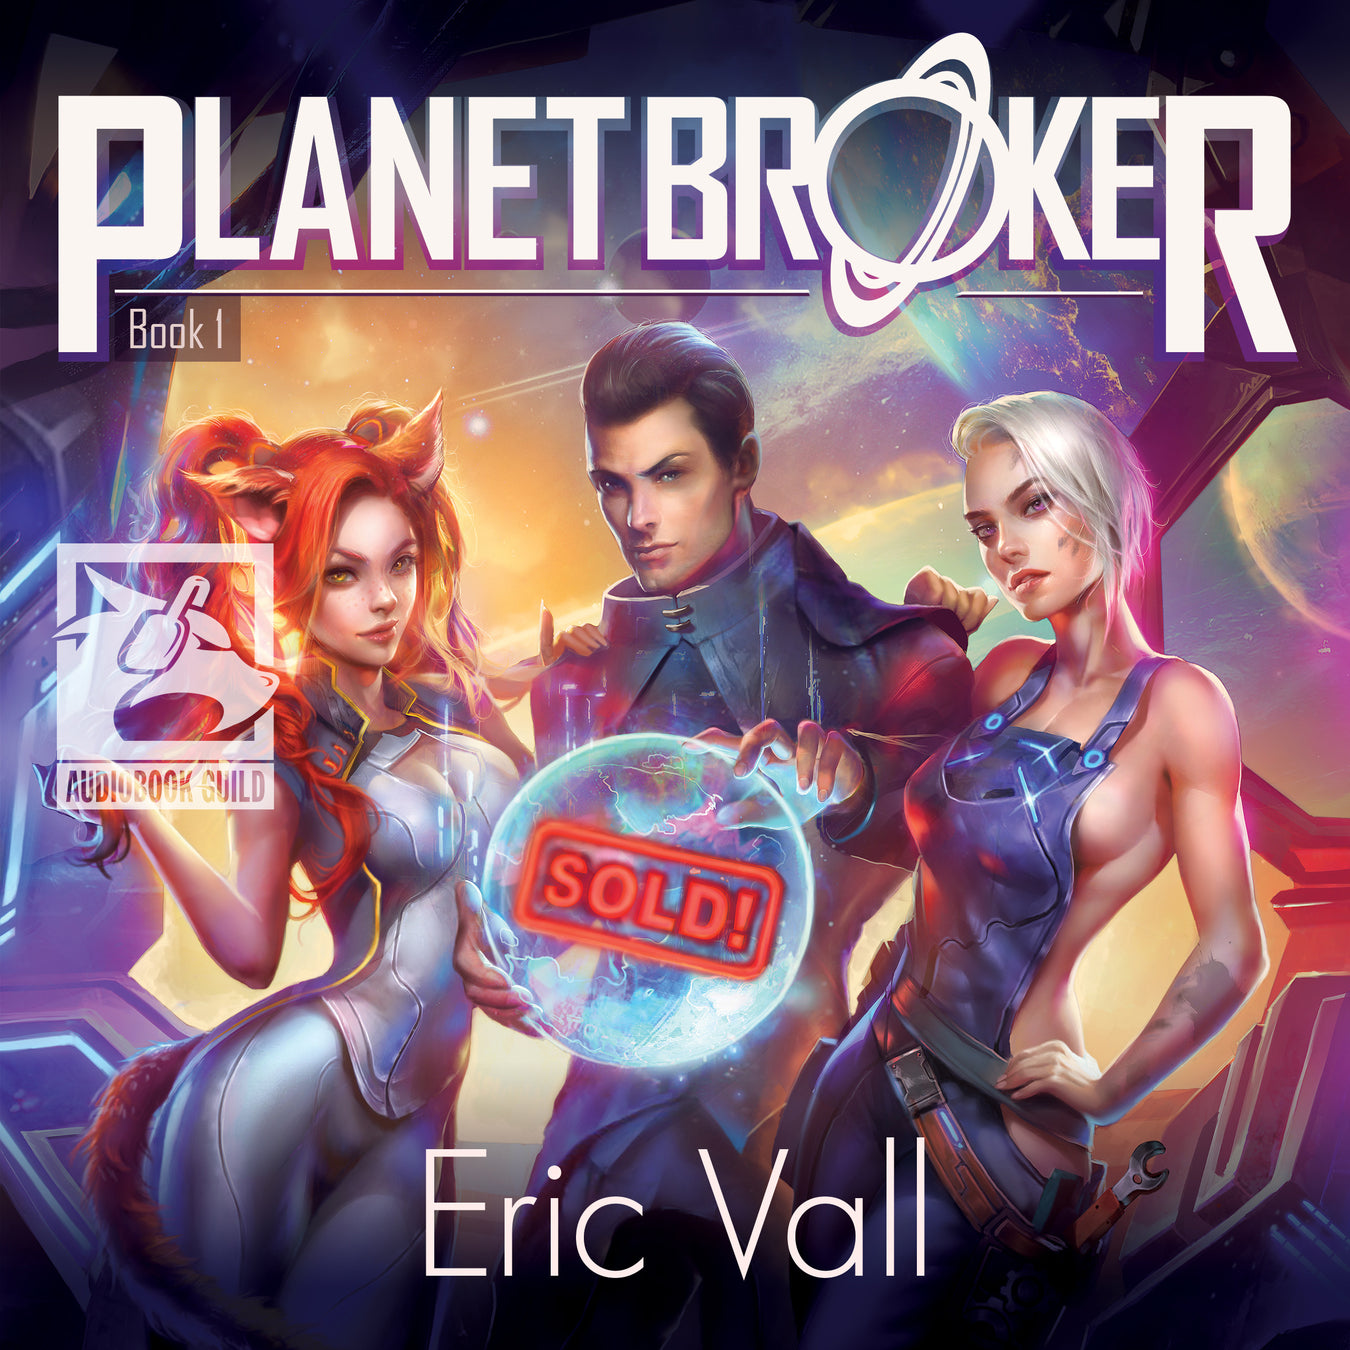 Planet Broker by Eric Vall